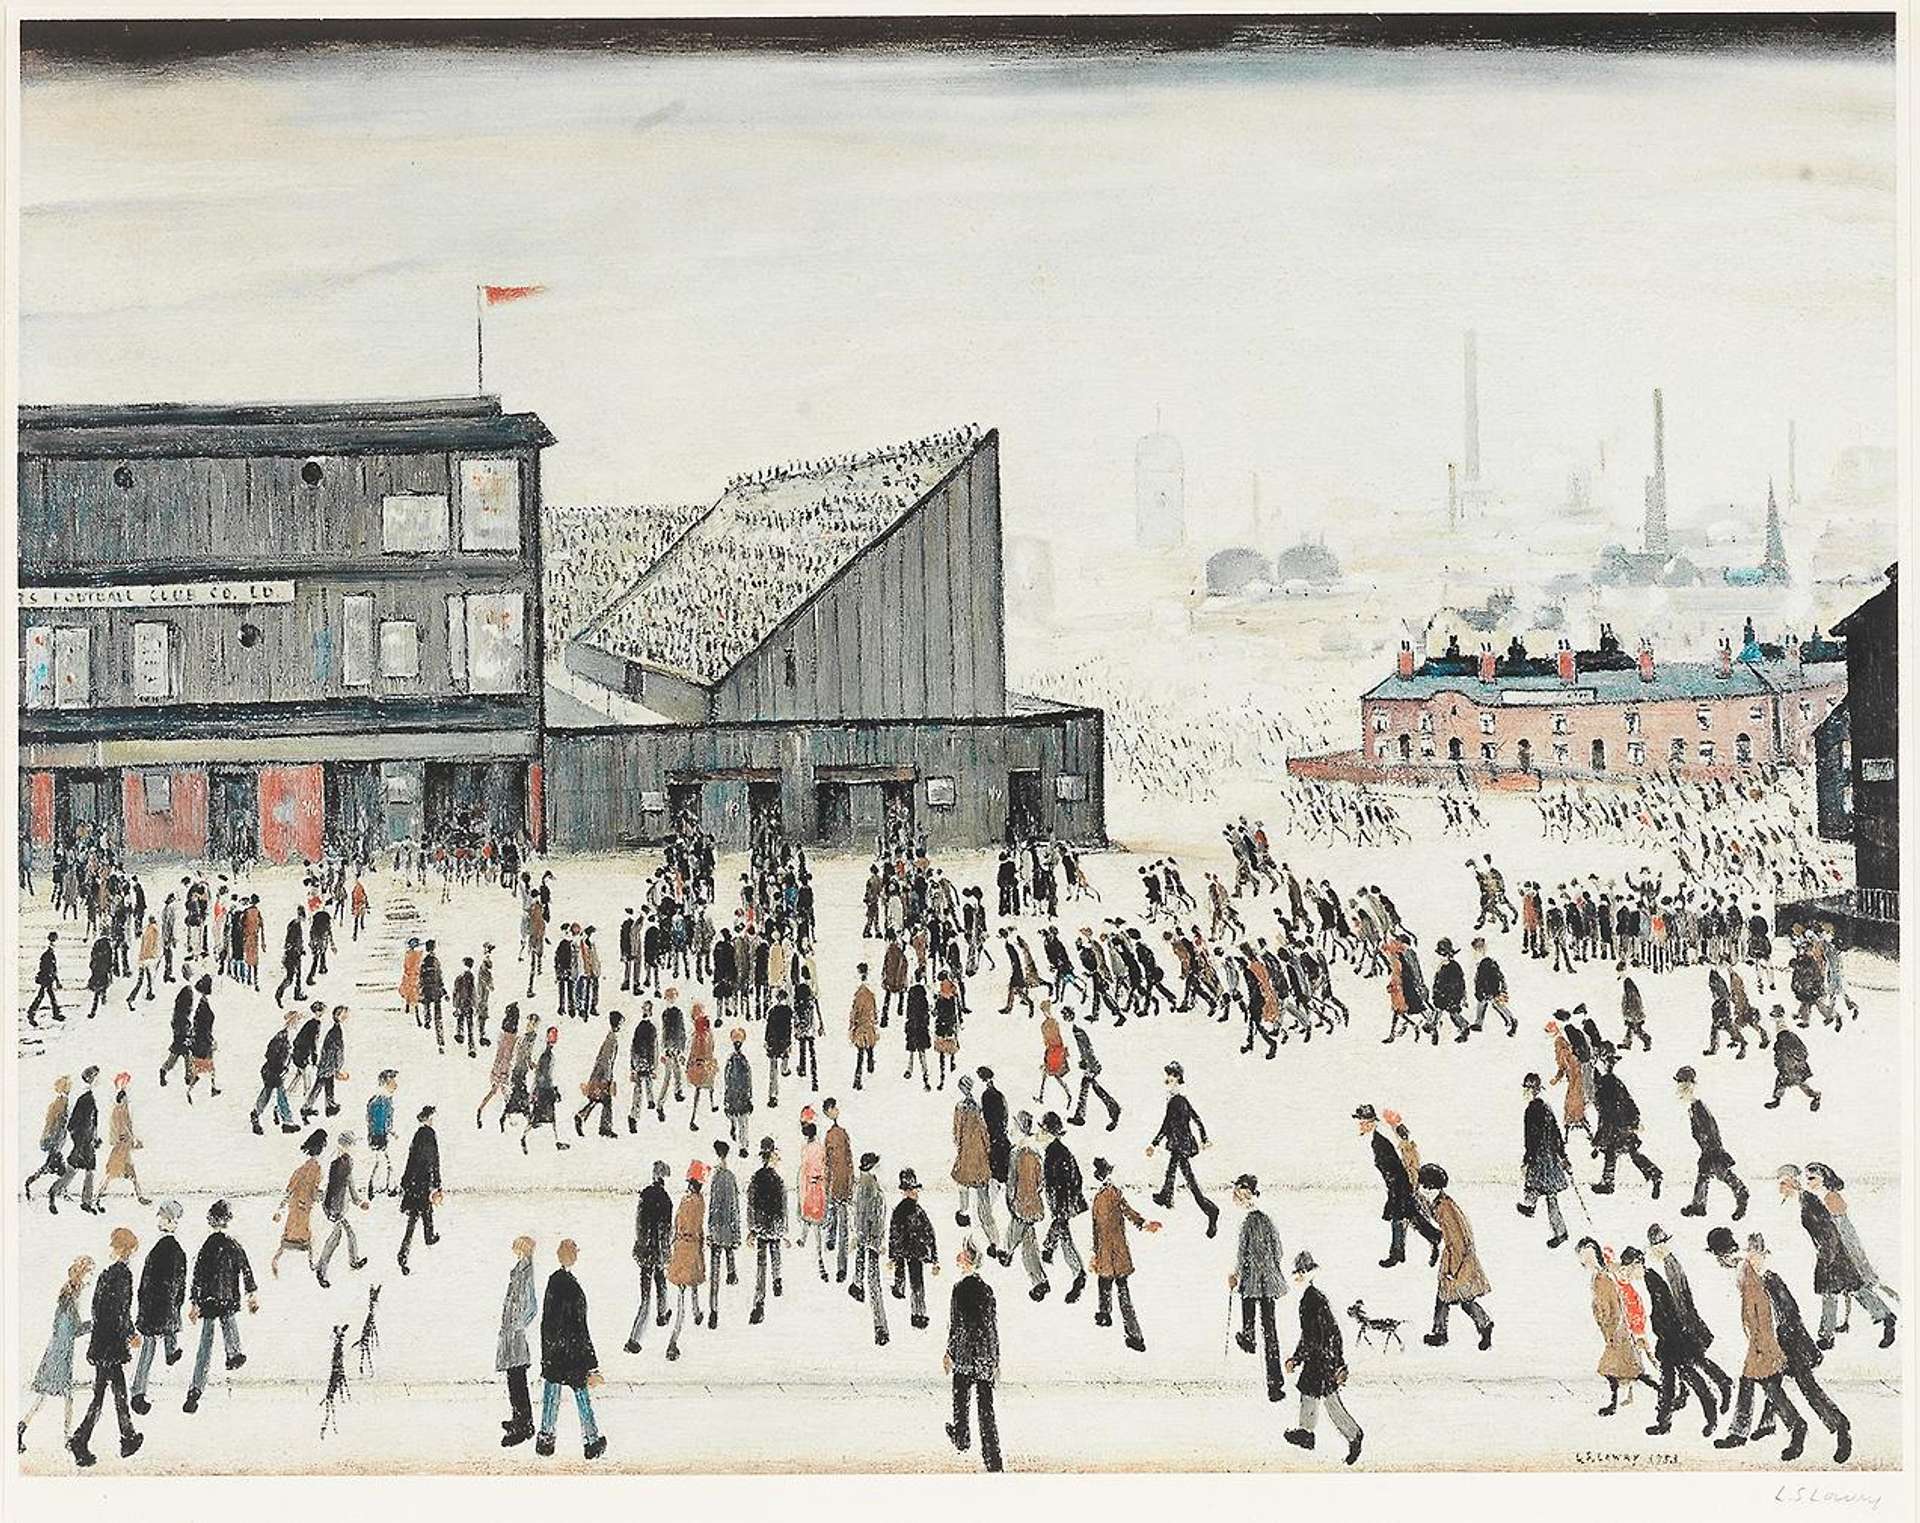 A scene depicting Lowry's iconic matchstick men, who promenade about in the foreground. In the background is the landscape of the football club located in Burnden Park.